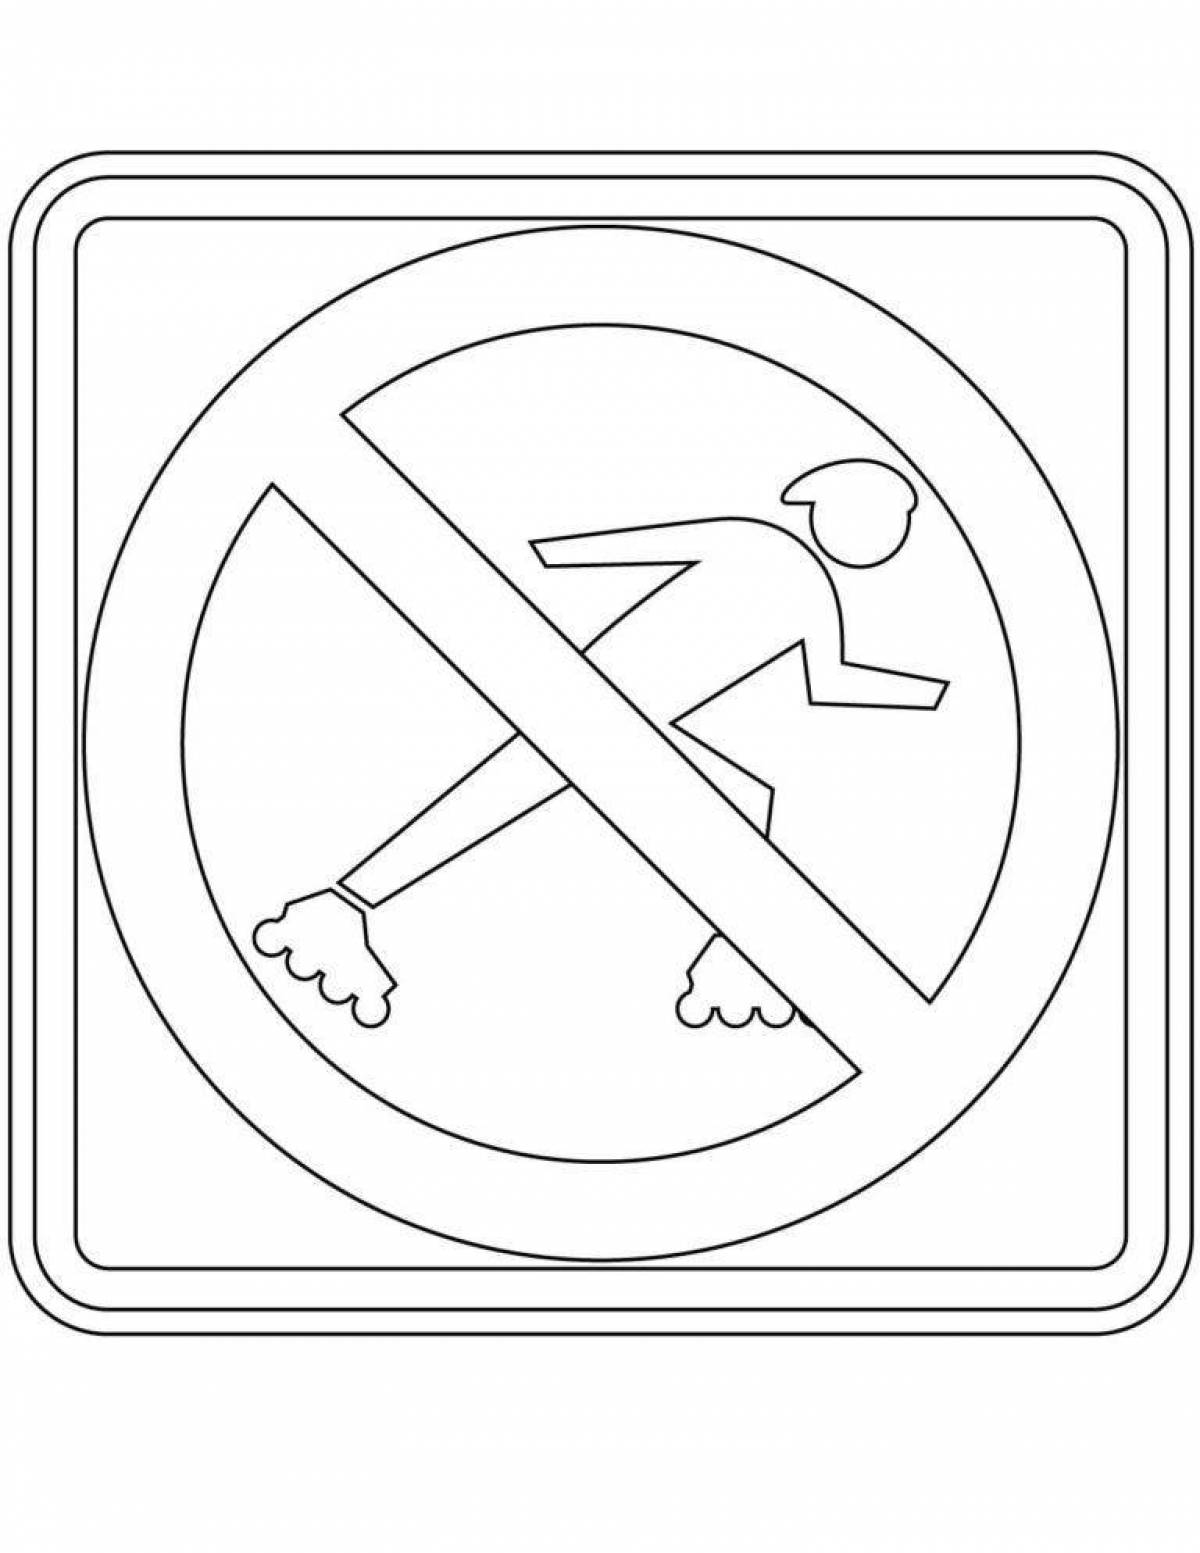 Traffic Sign Coloring Page Grade 2